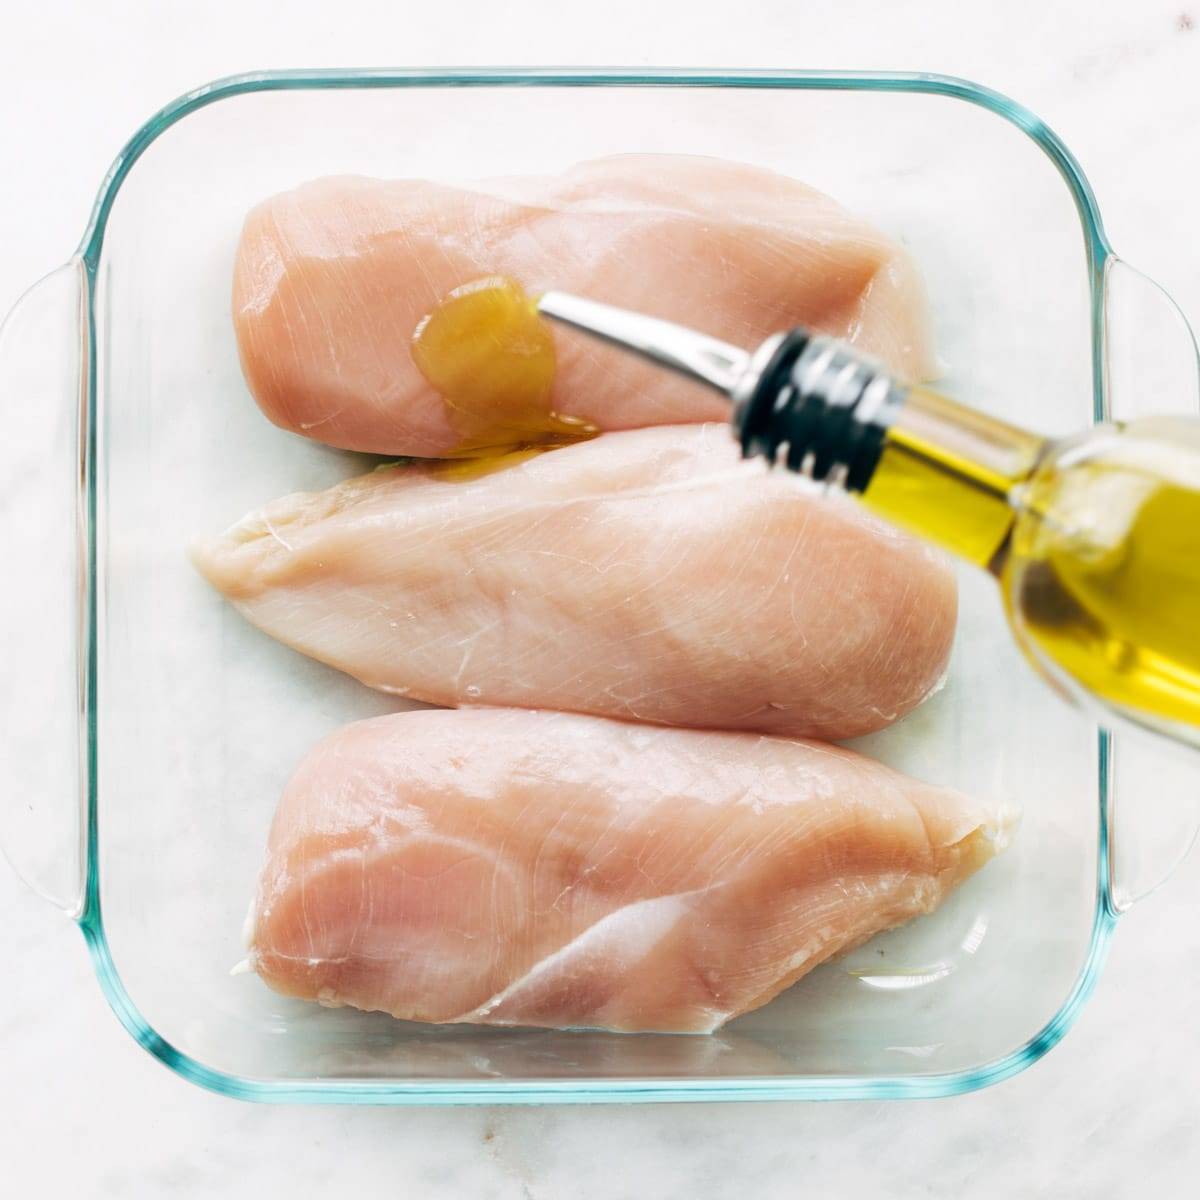 Raw chicken breasts in a baking dish.